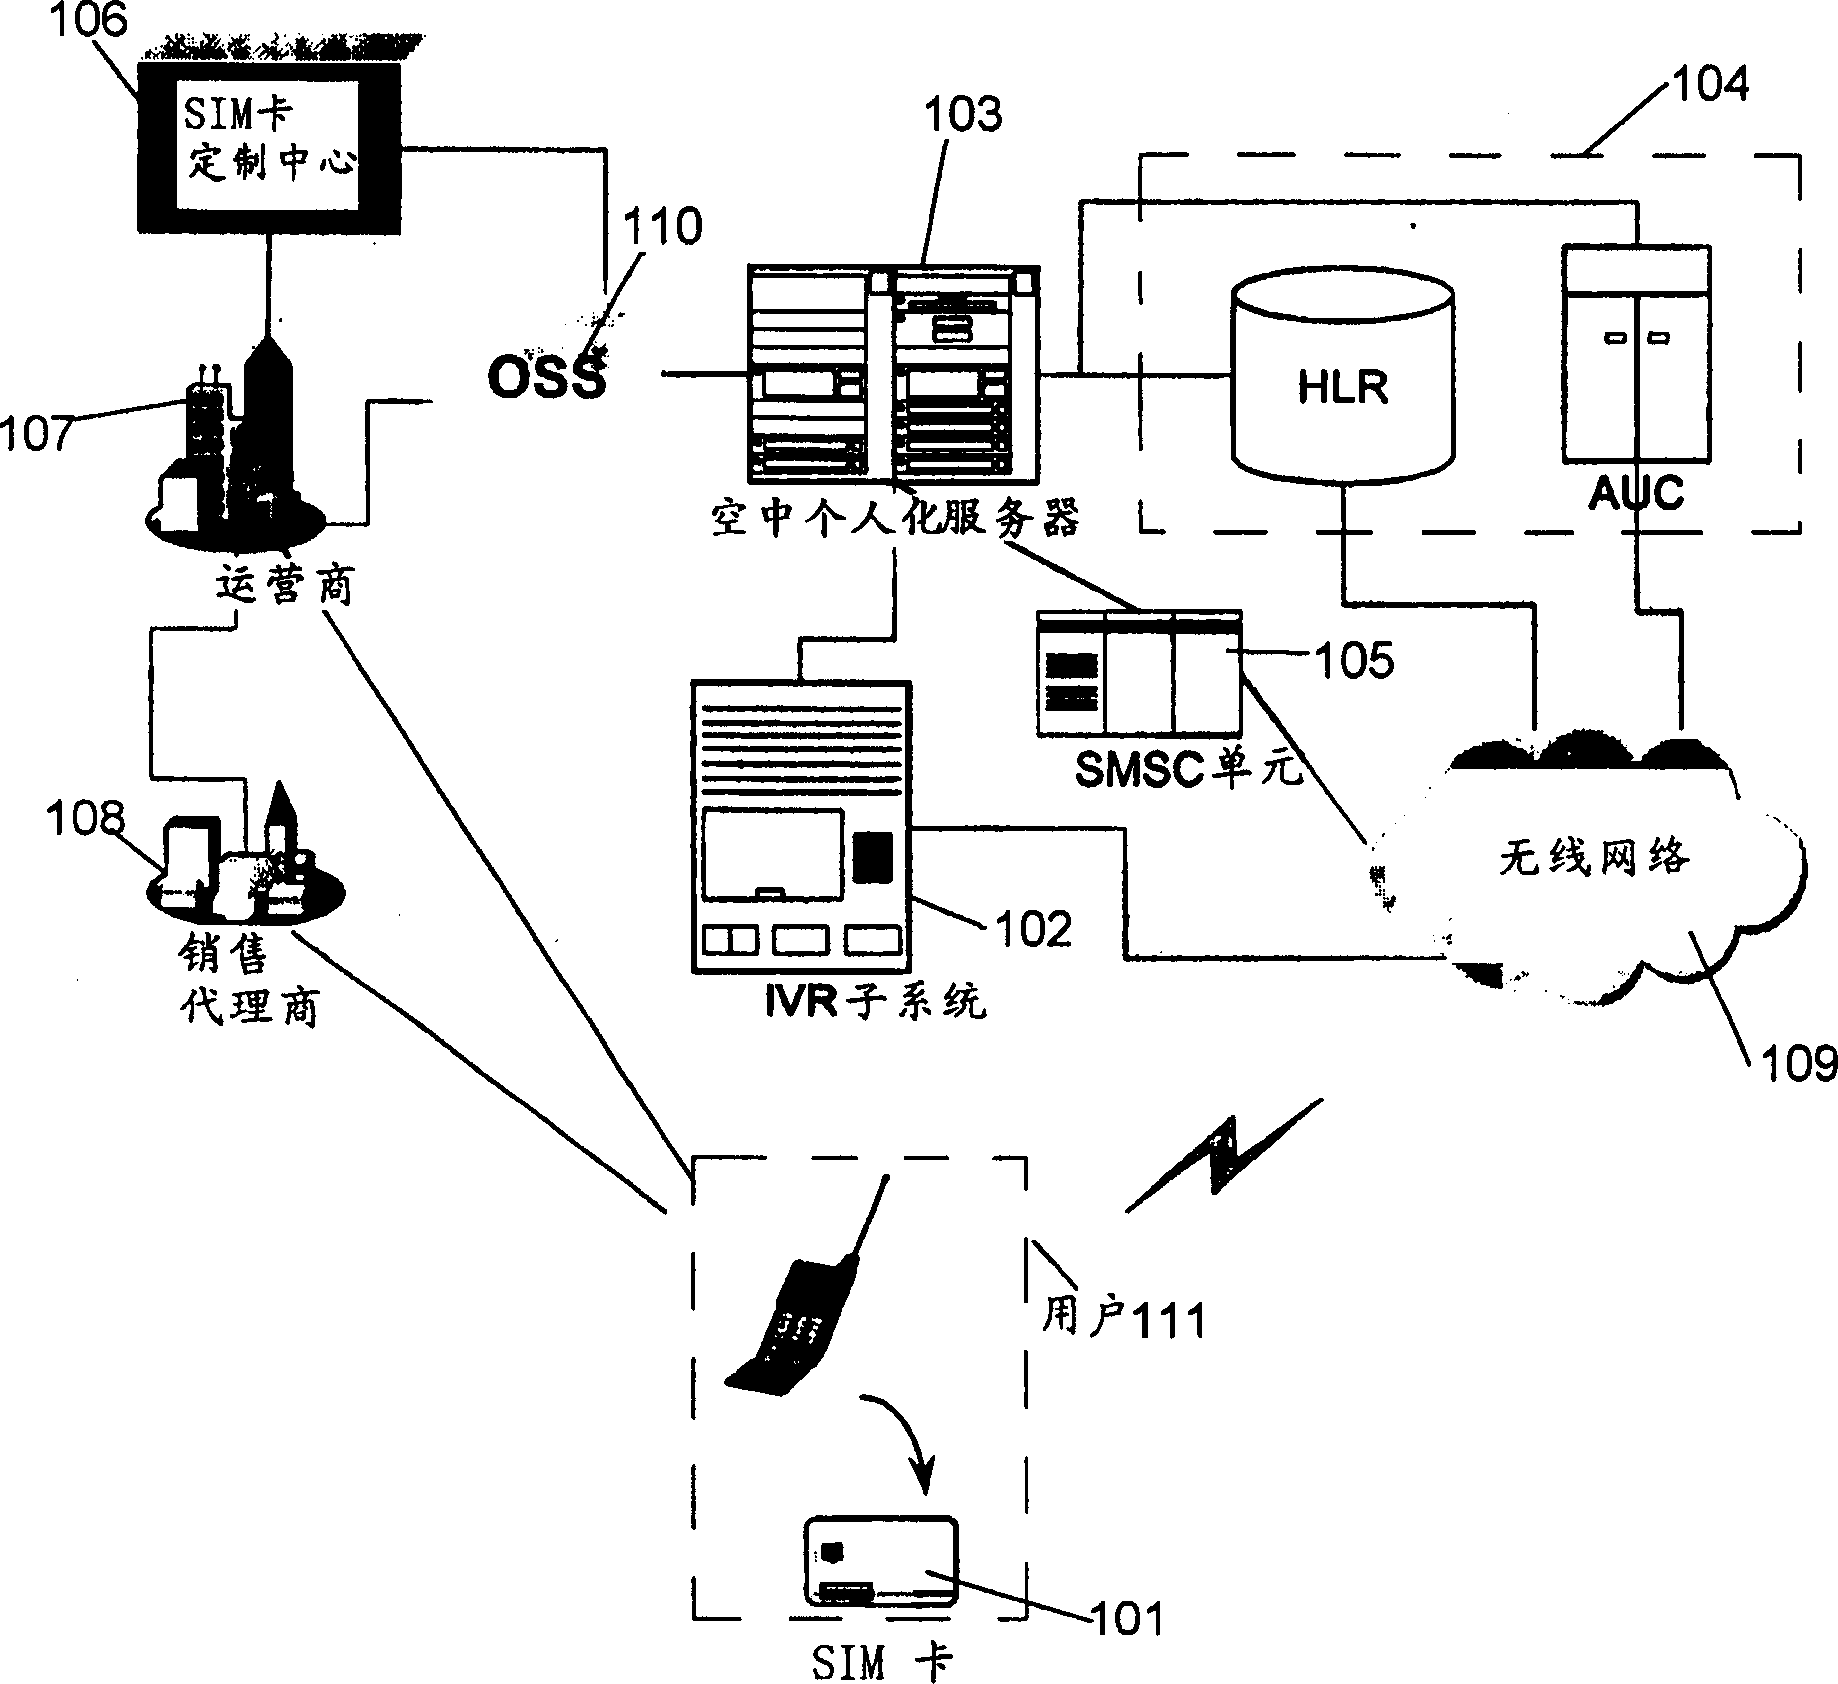 User identification module card, method for activating user identification module card in sky and its system